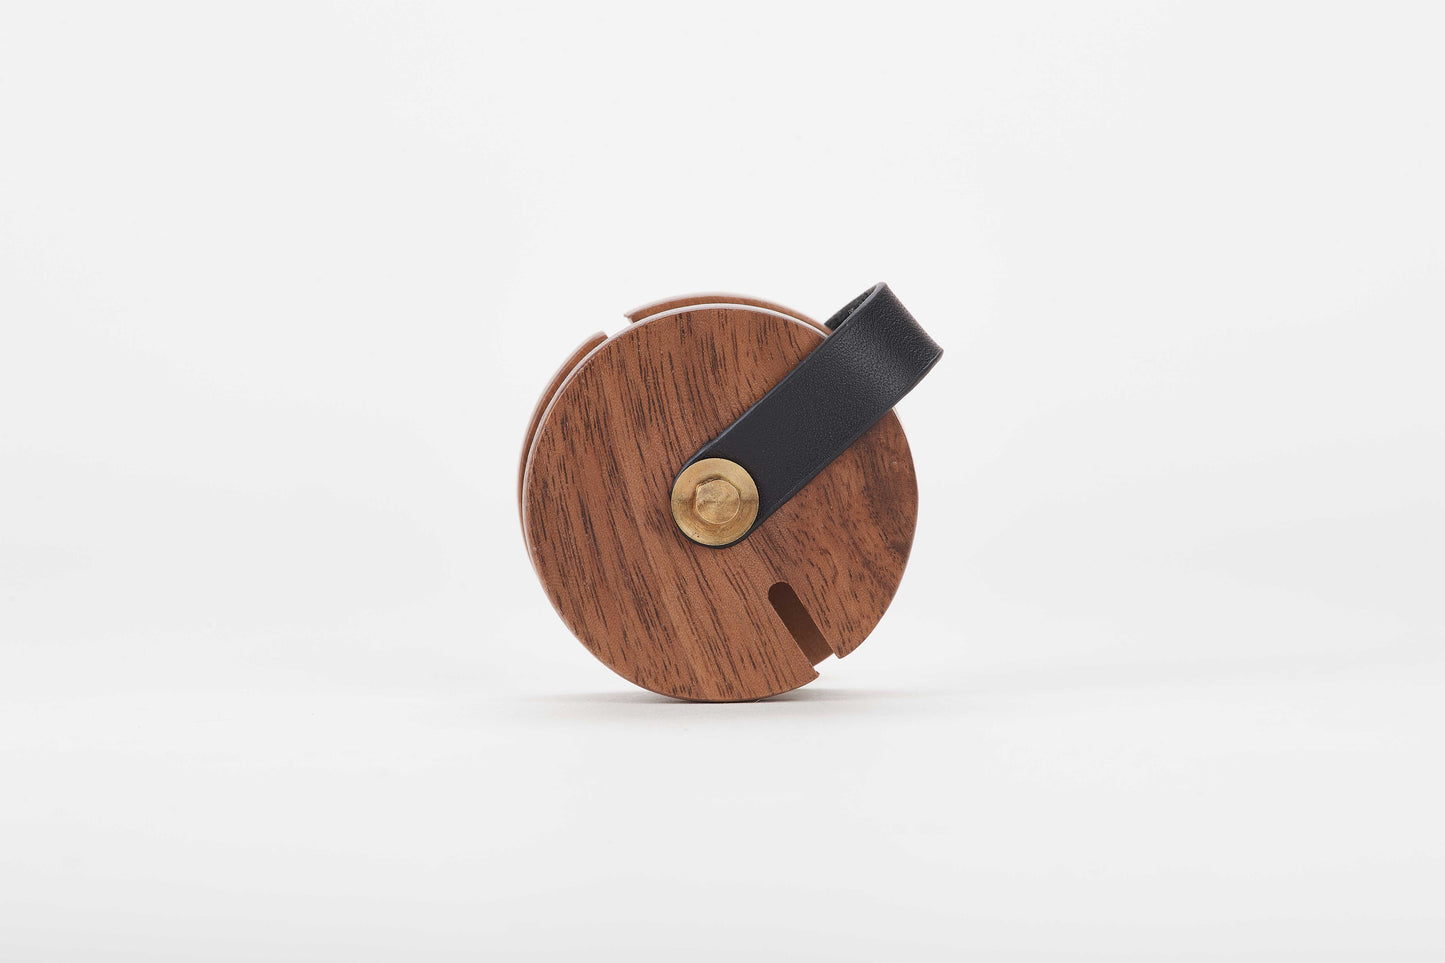 Wooden Cord Organizer - Lucid and Real